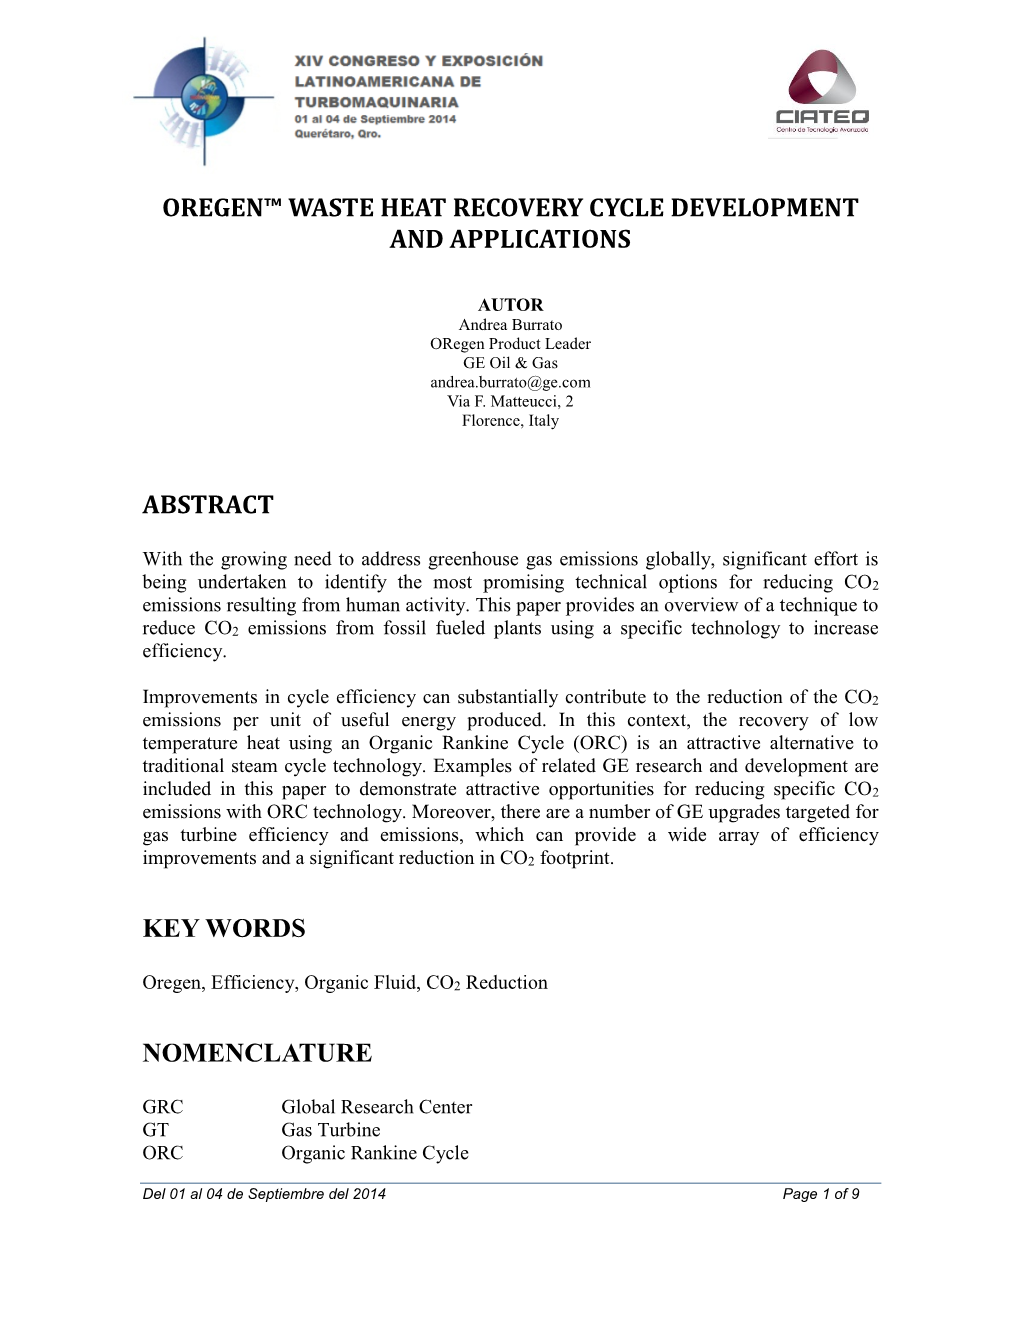 Oregen™ Waste Heat Recovery Cycle Development and Applications